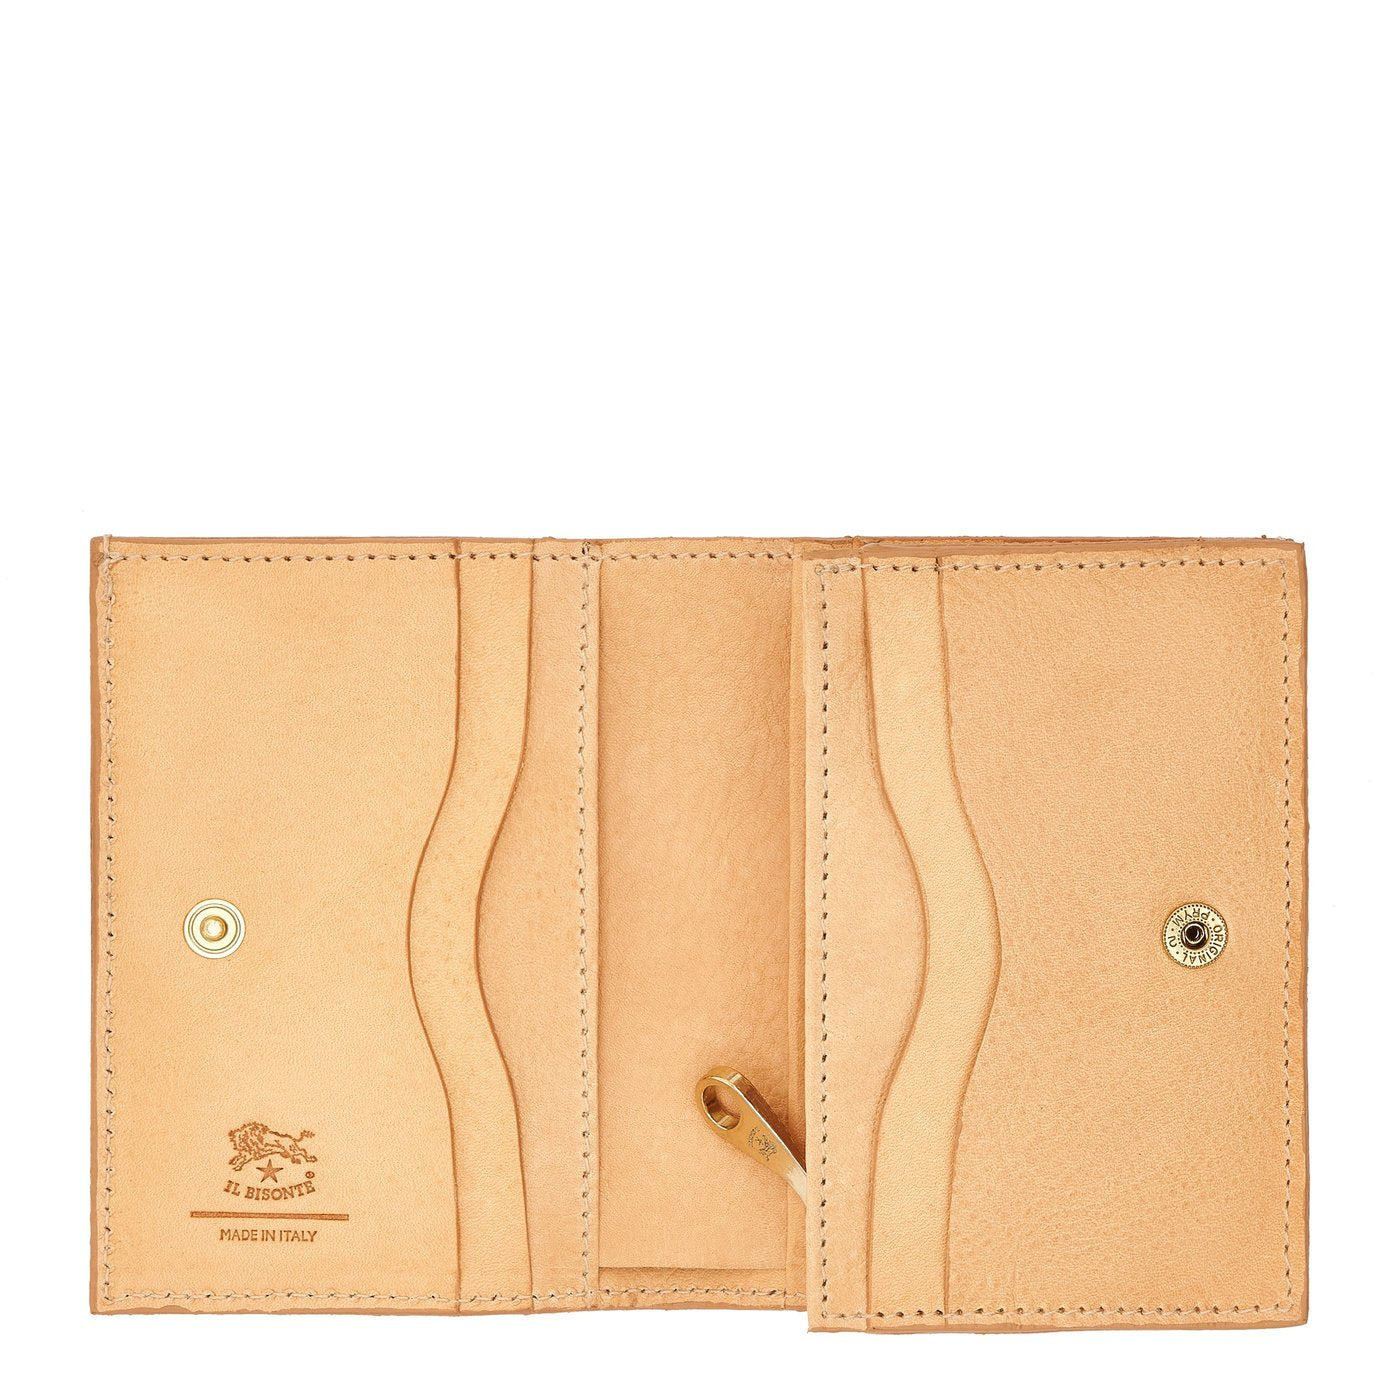 Women's Small Wallet in Leather color Honey - Oliveta line SSW014